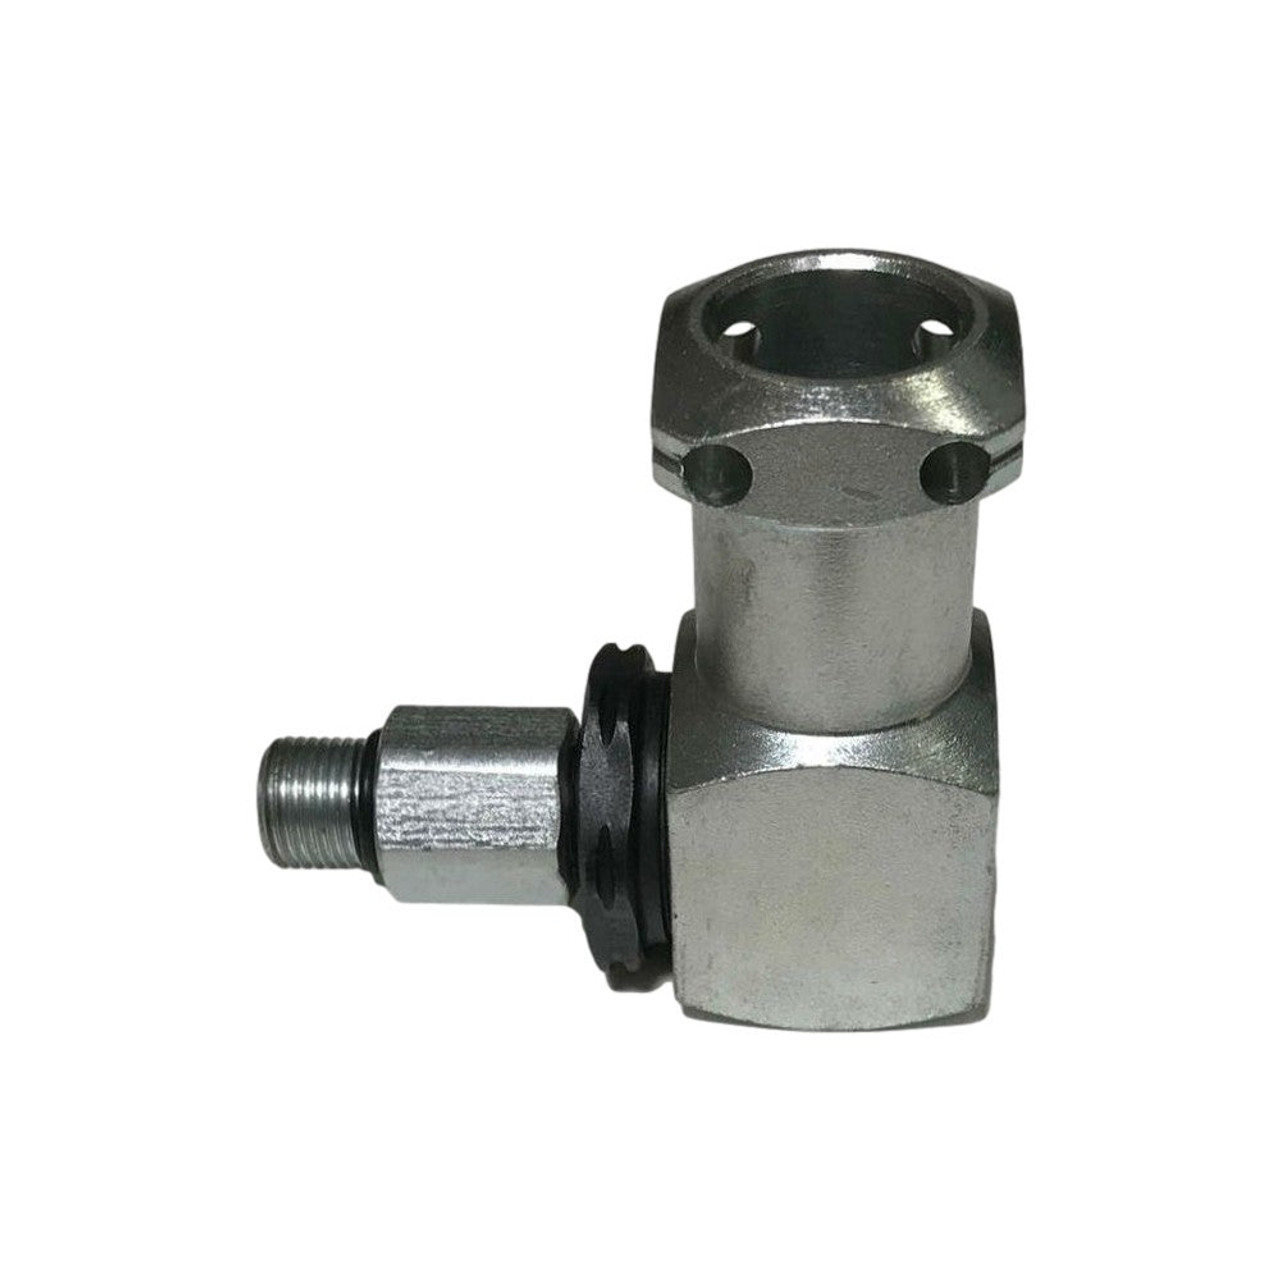 Lincoln Industrial 274840 Swivel Assembly for #82206 Bare Hose